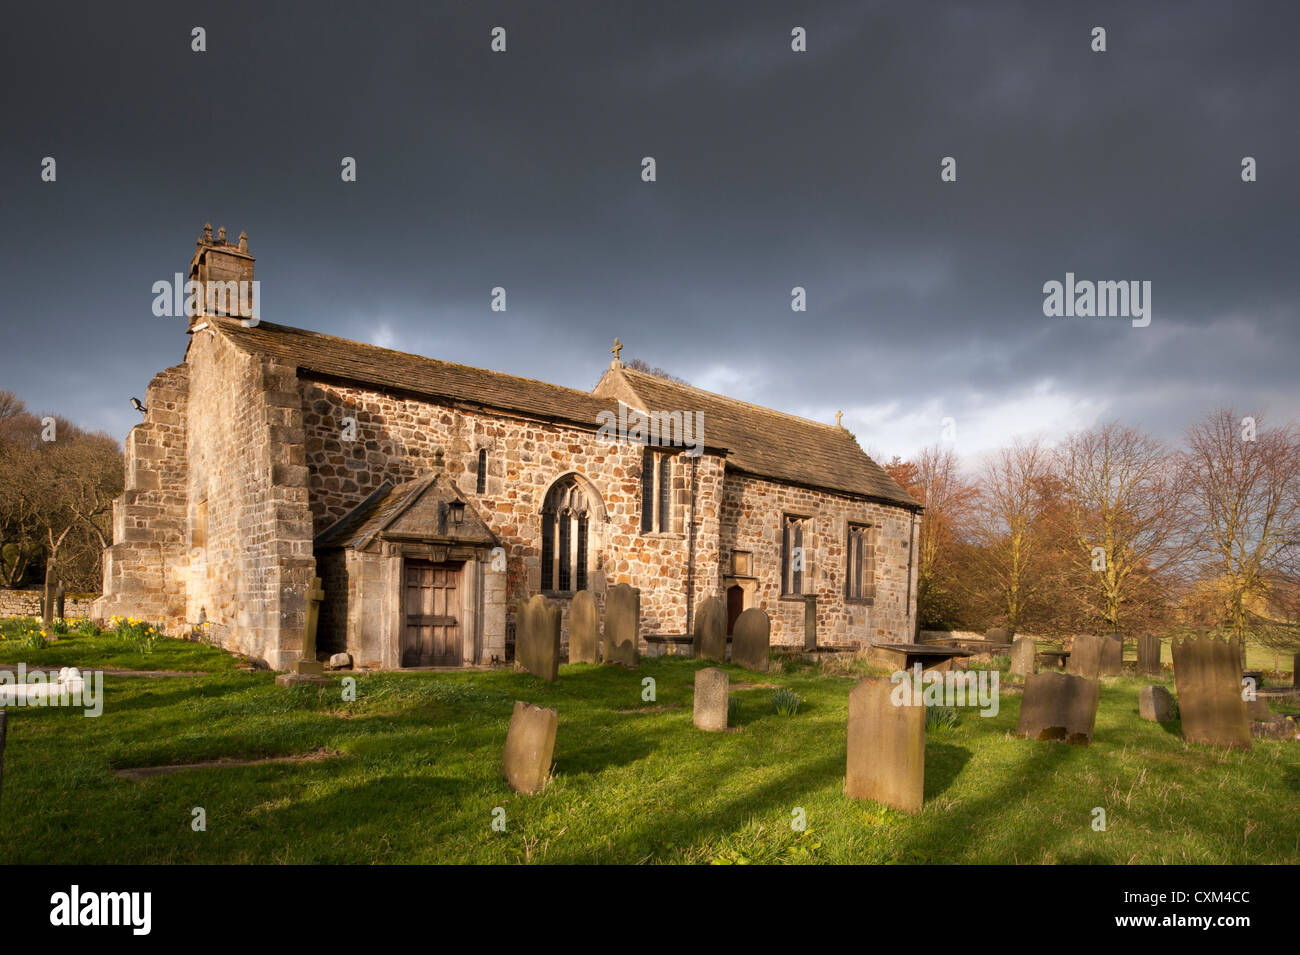 Exterior of historic sunlit All Saints Church & churchyard headstones in quiet scenic countryside under dark sky, Weston, North Yorkshire, England, UK Stock Photo